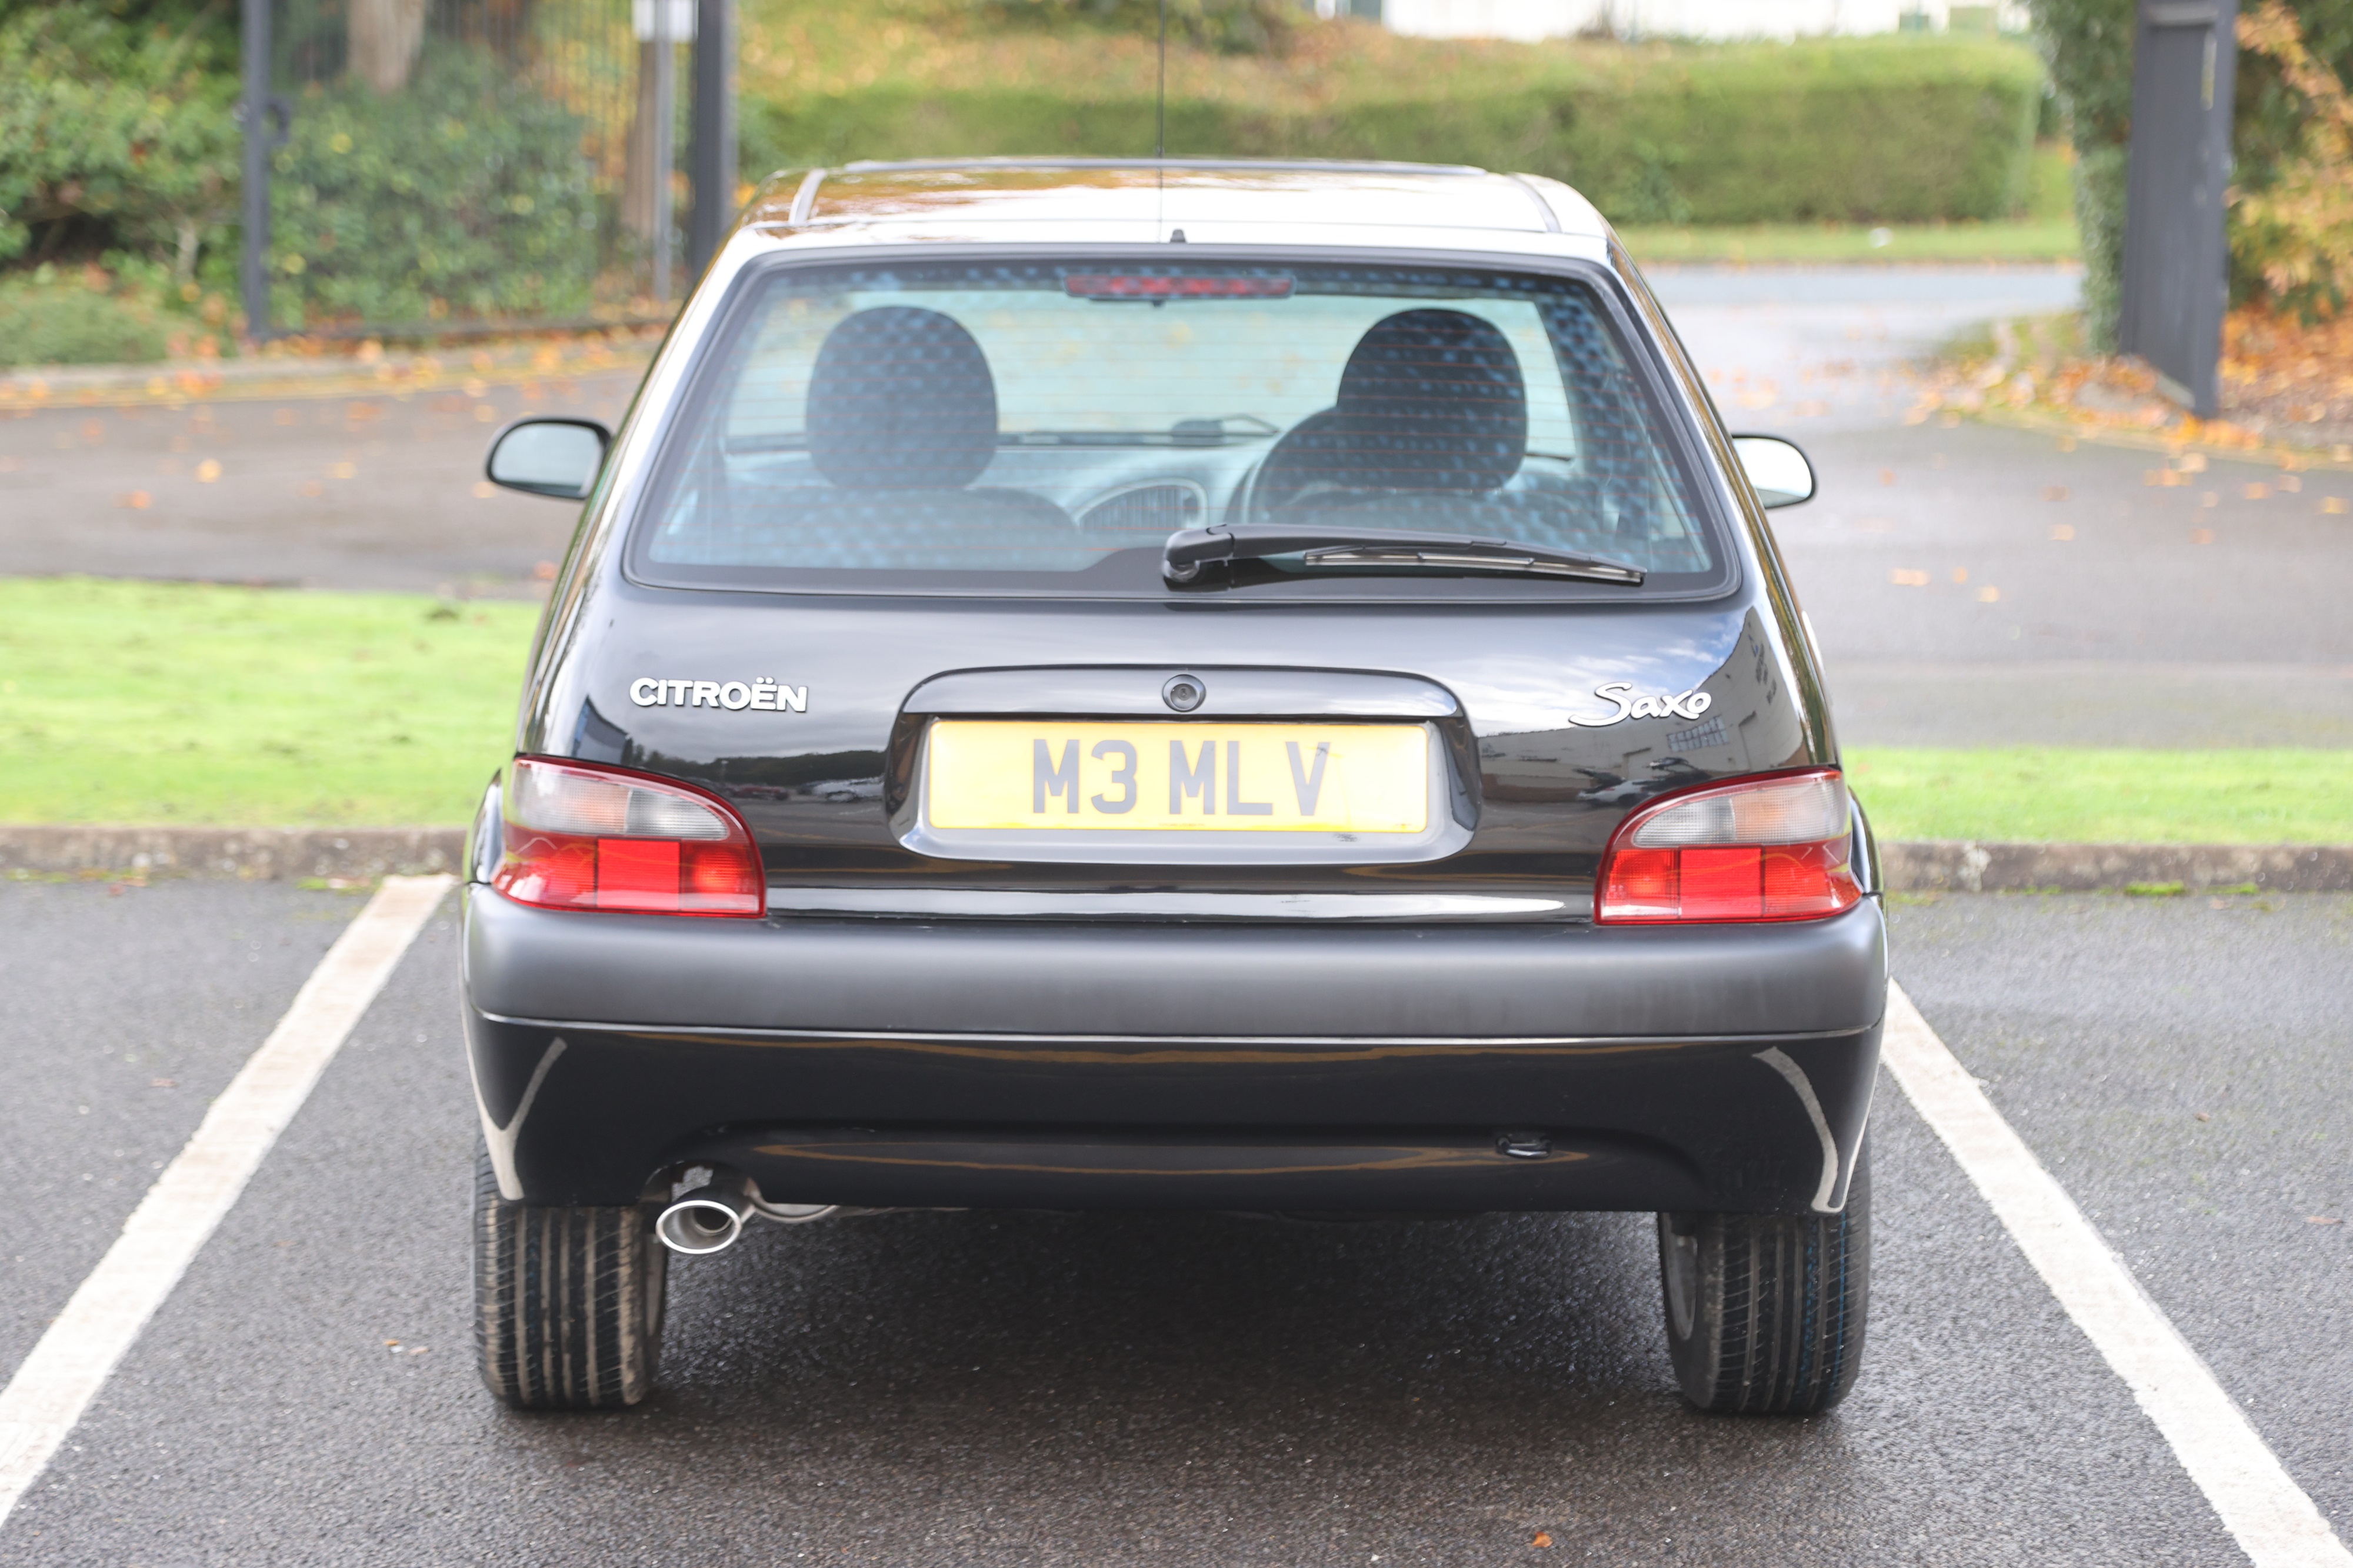 RE: One-owner-from-new Citroen Saxo VTR for sale - Page 1